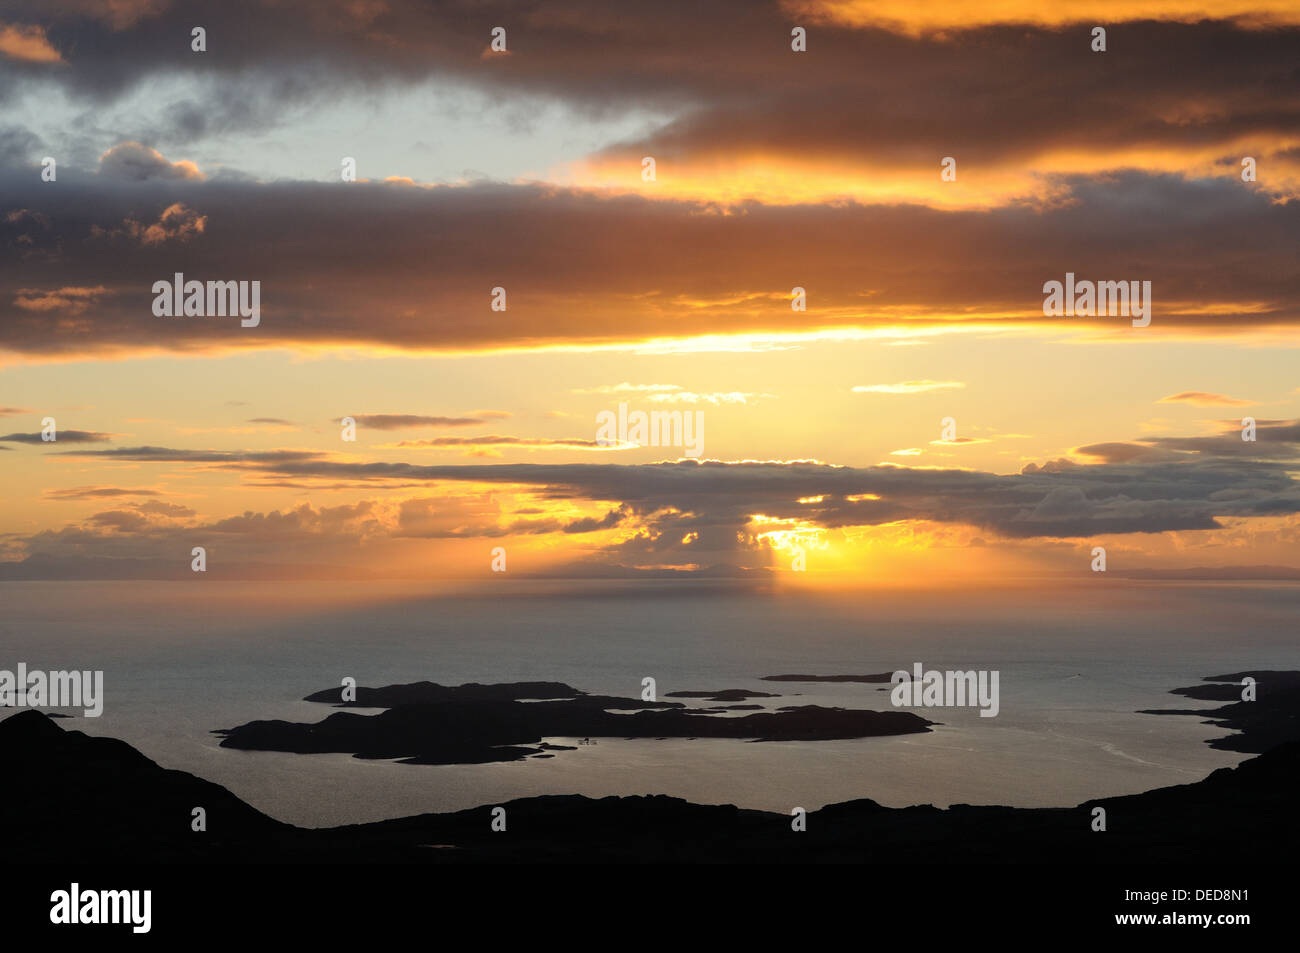 Sunset over the Summer Isles from Sgurr an Fhidhleir, Loch Broom, Scotland Stock Photo